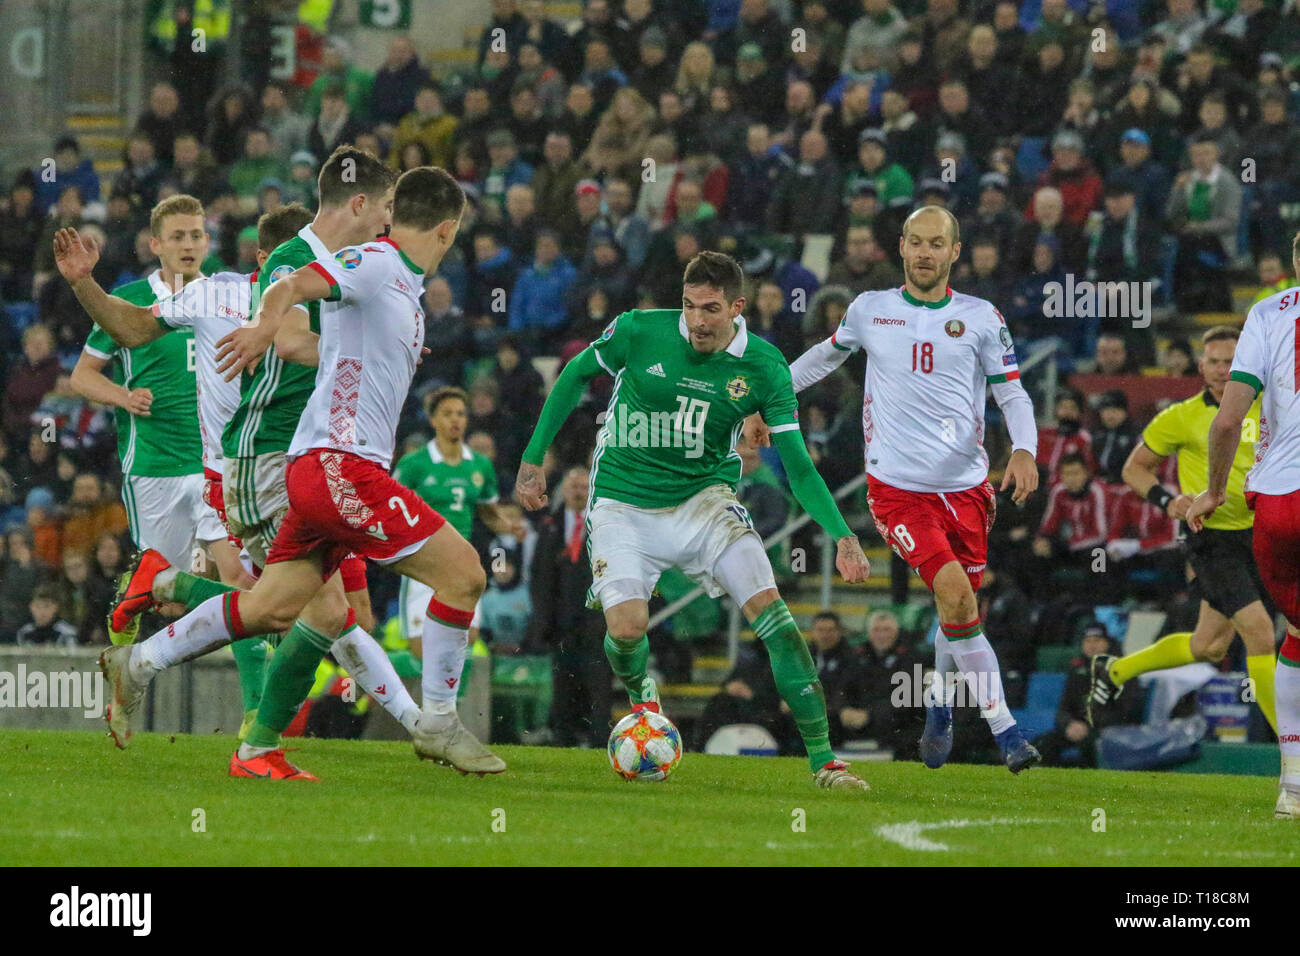 National Football Stadium at Windsor Park, Belfast, Northern Ireland. 24  March 2019. UEFA EURO 2020 Qualifier- Northern Ireland v Belarus. Action from tonight's game. Kyle Lafferty (10) on the attack for Northern Ireland. Credit: David Hunter/Alamy Live News. Stock Photo